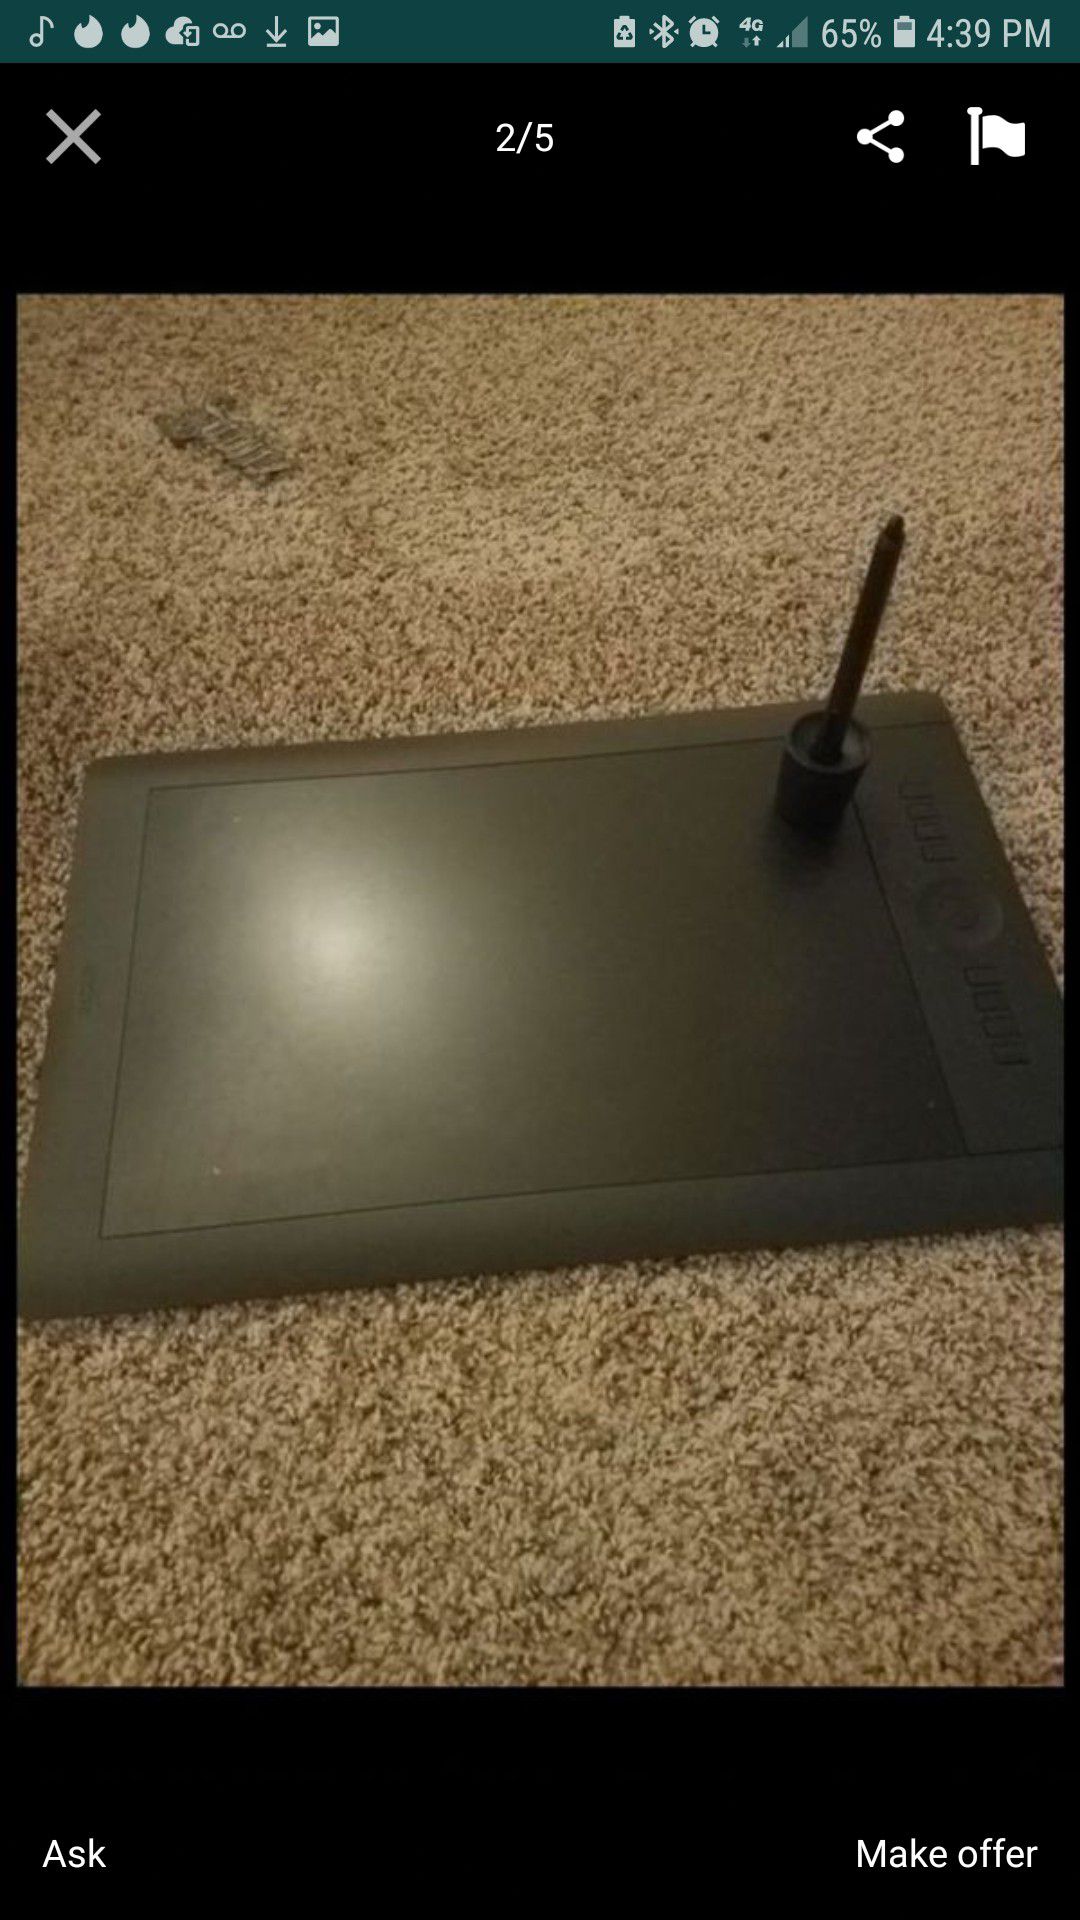 Wacom intuos pro large tablet